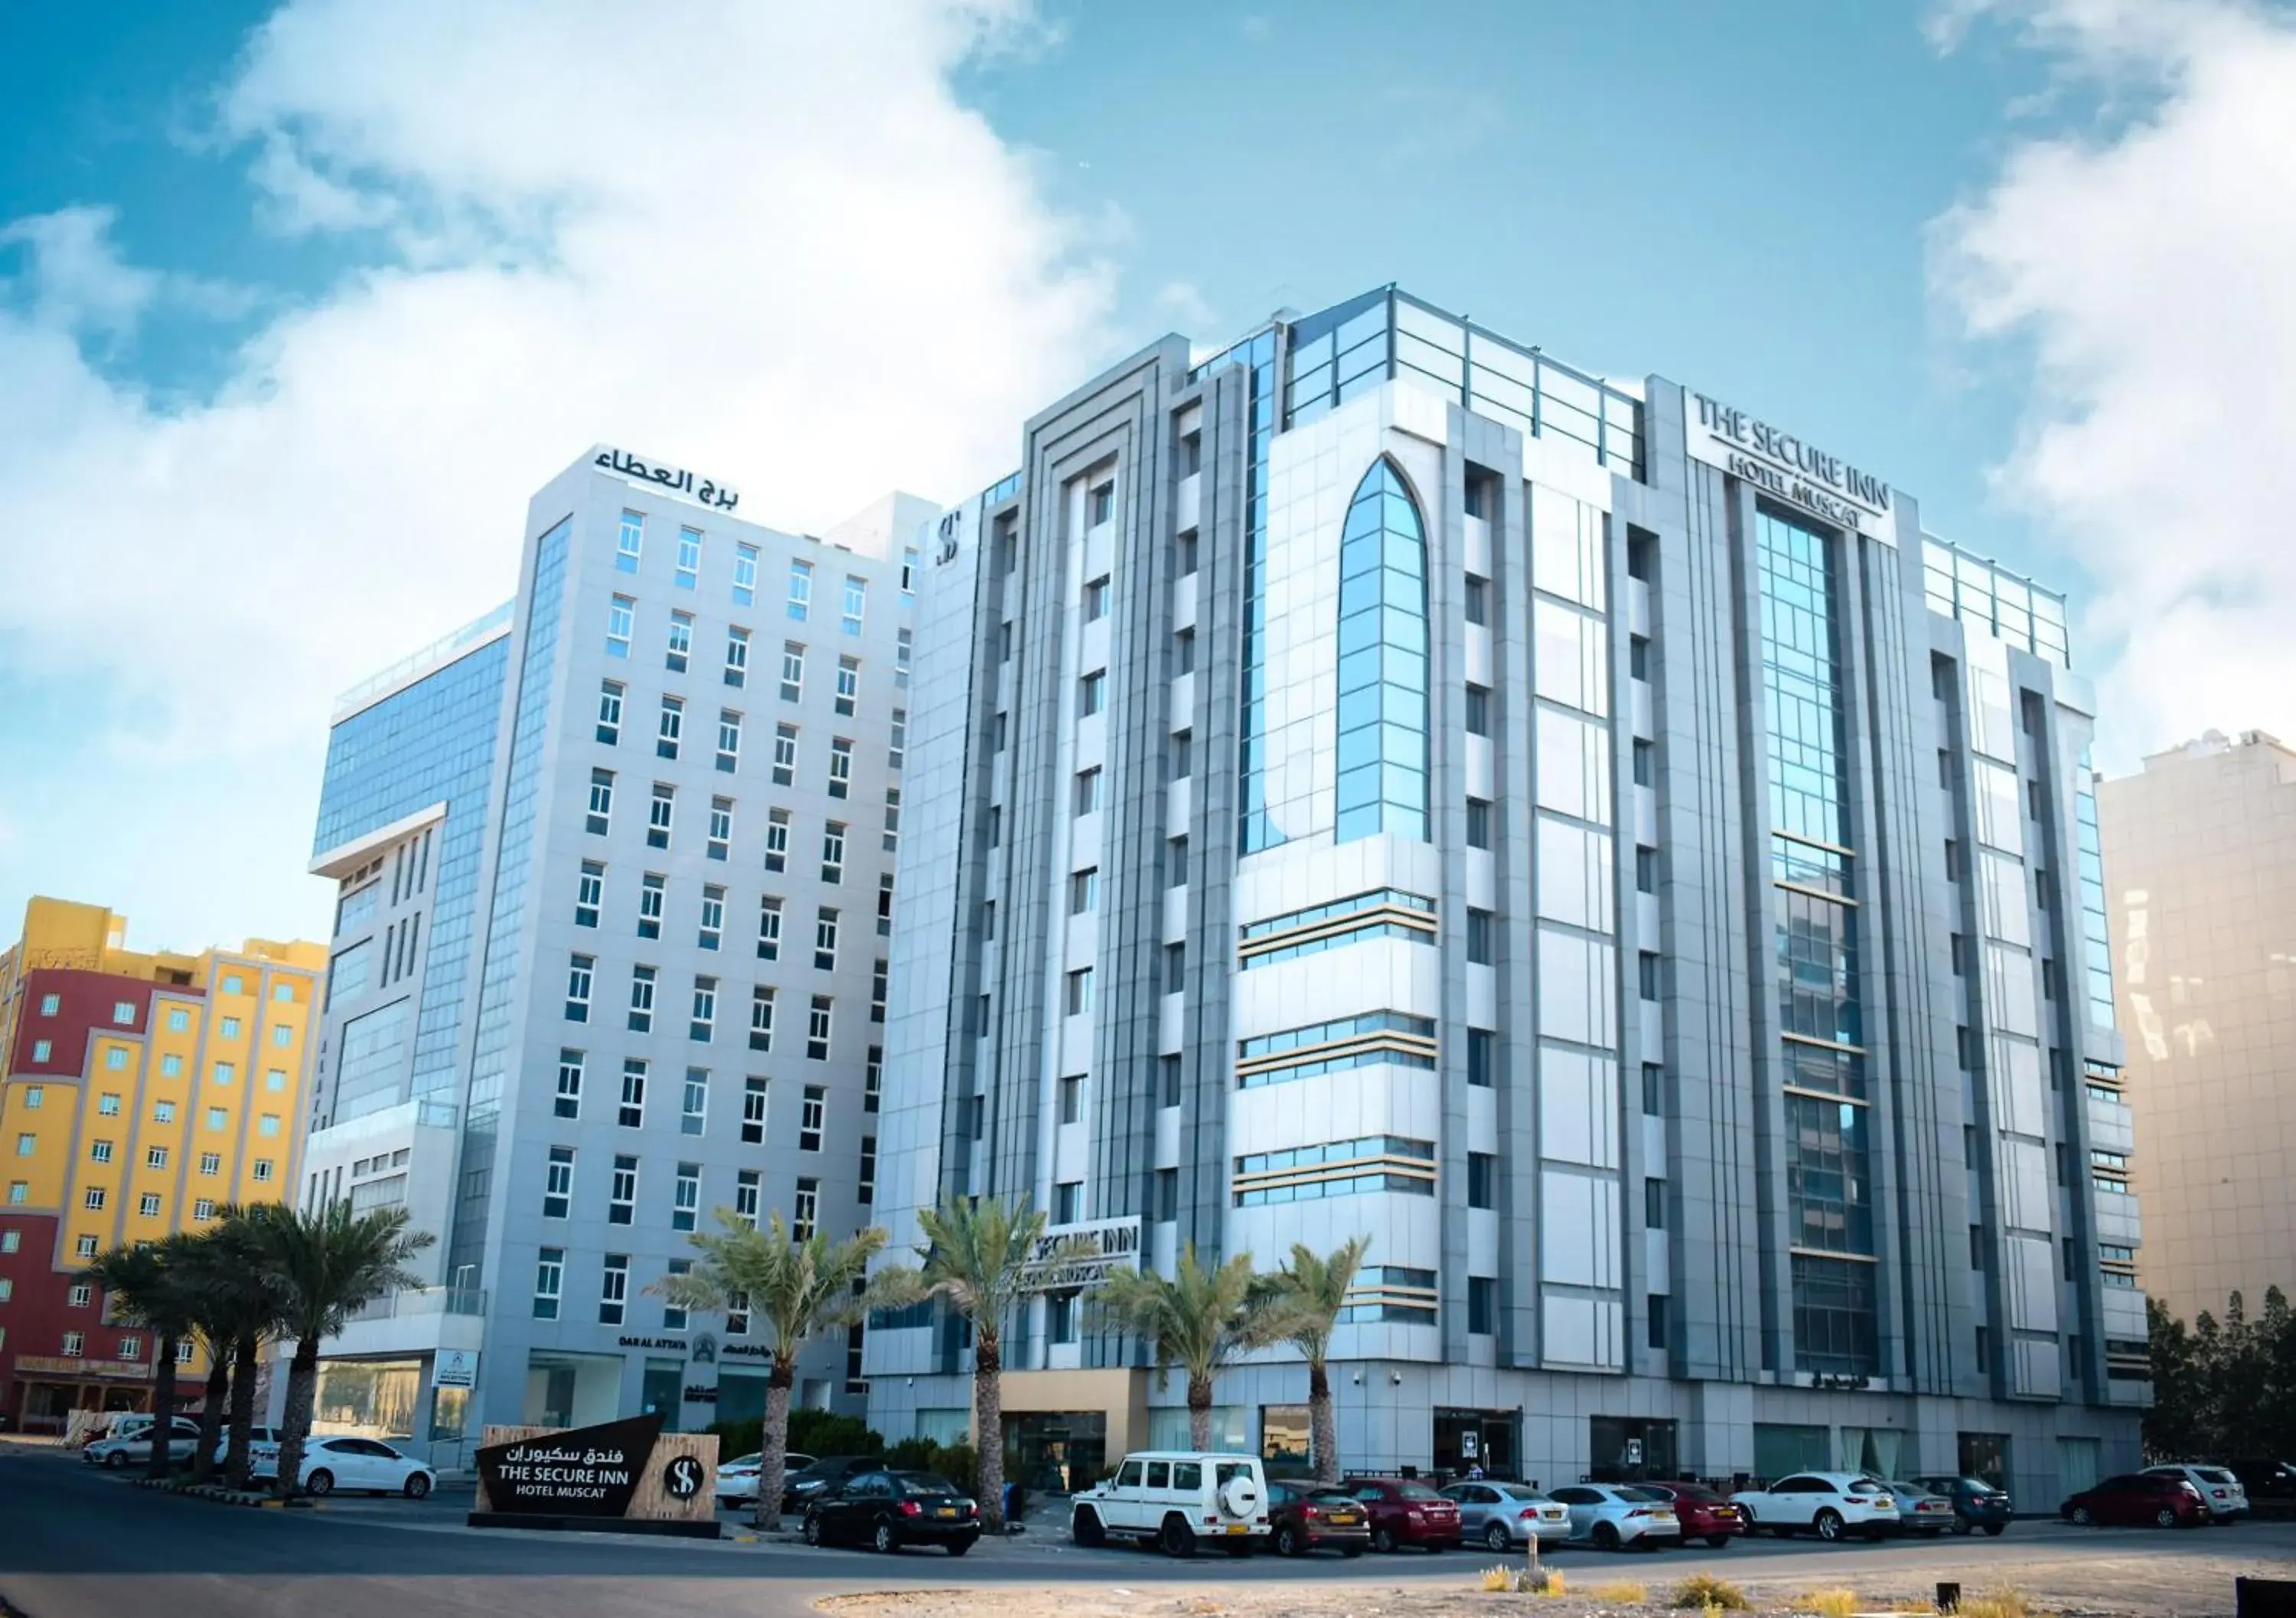 Property Building in The Secure Inn Hotel Muscat